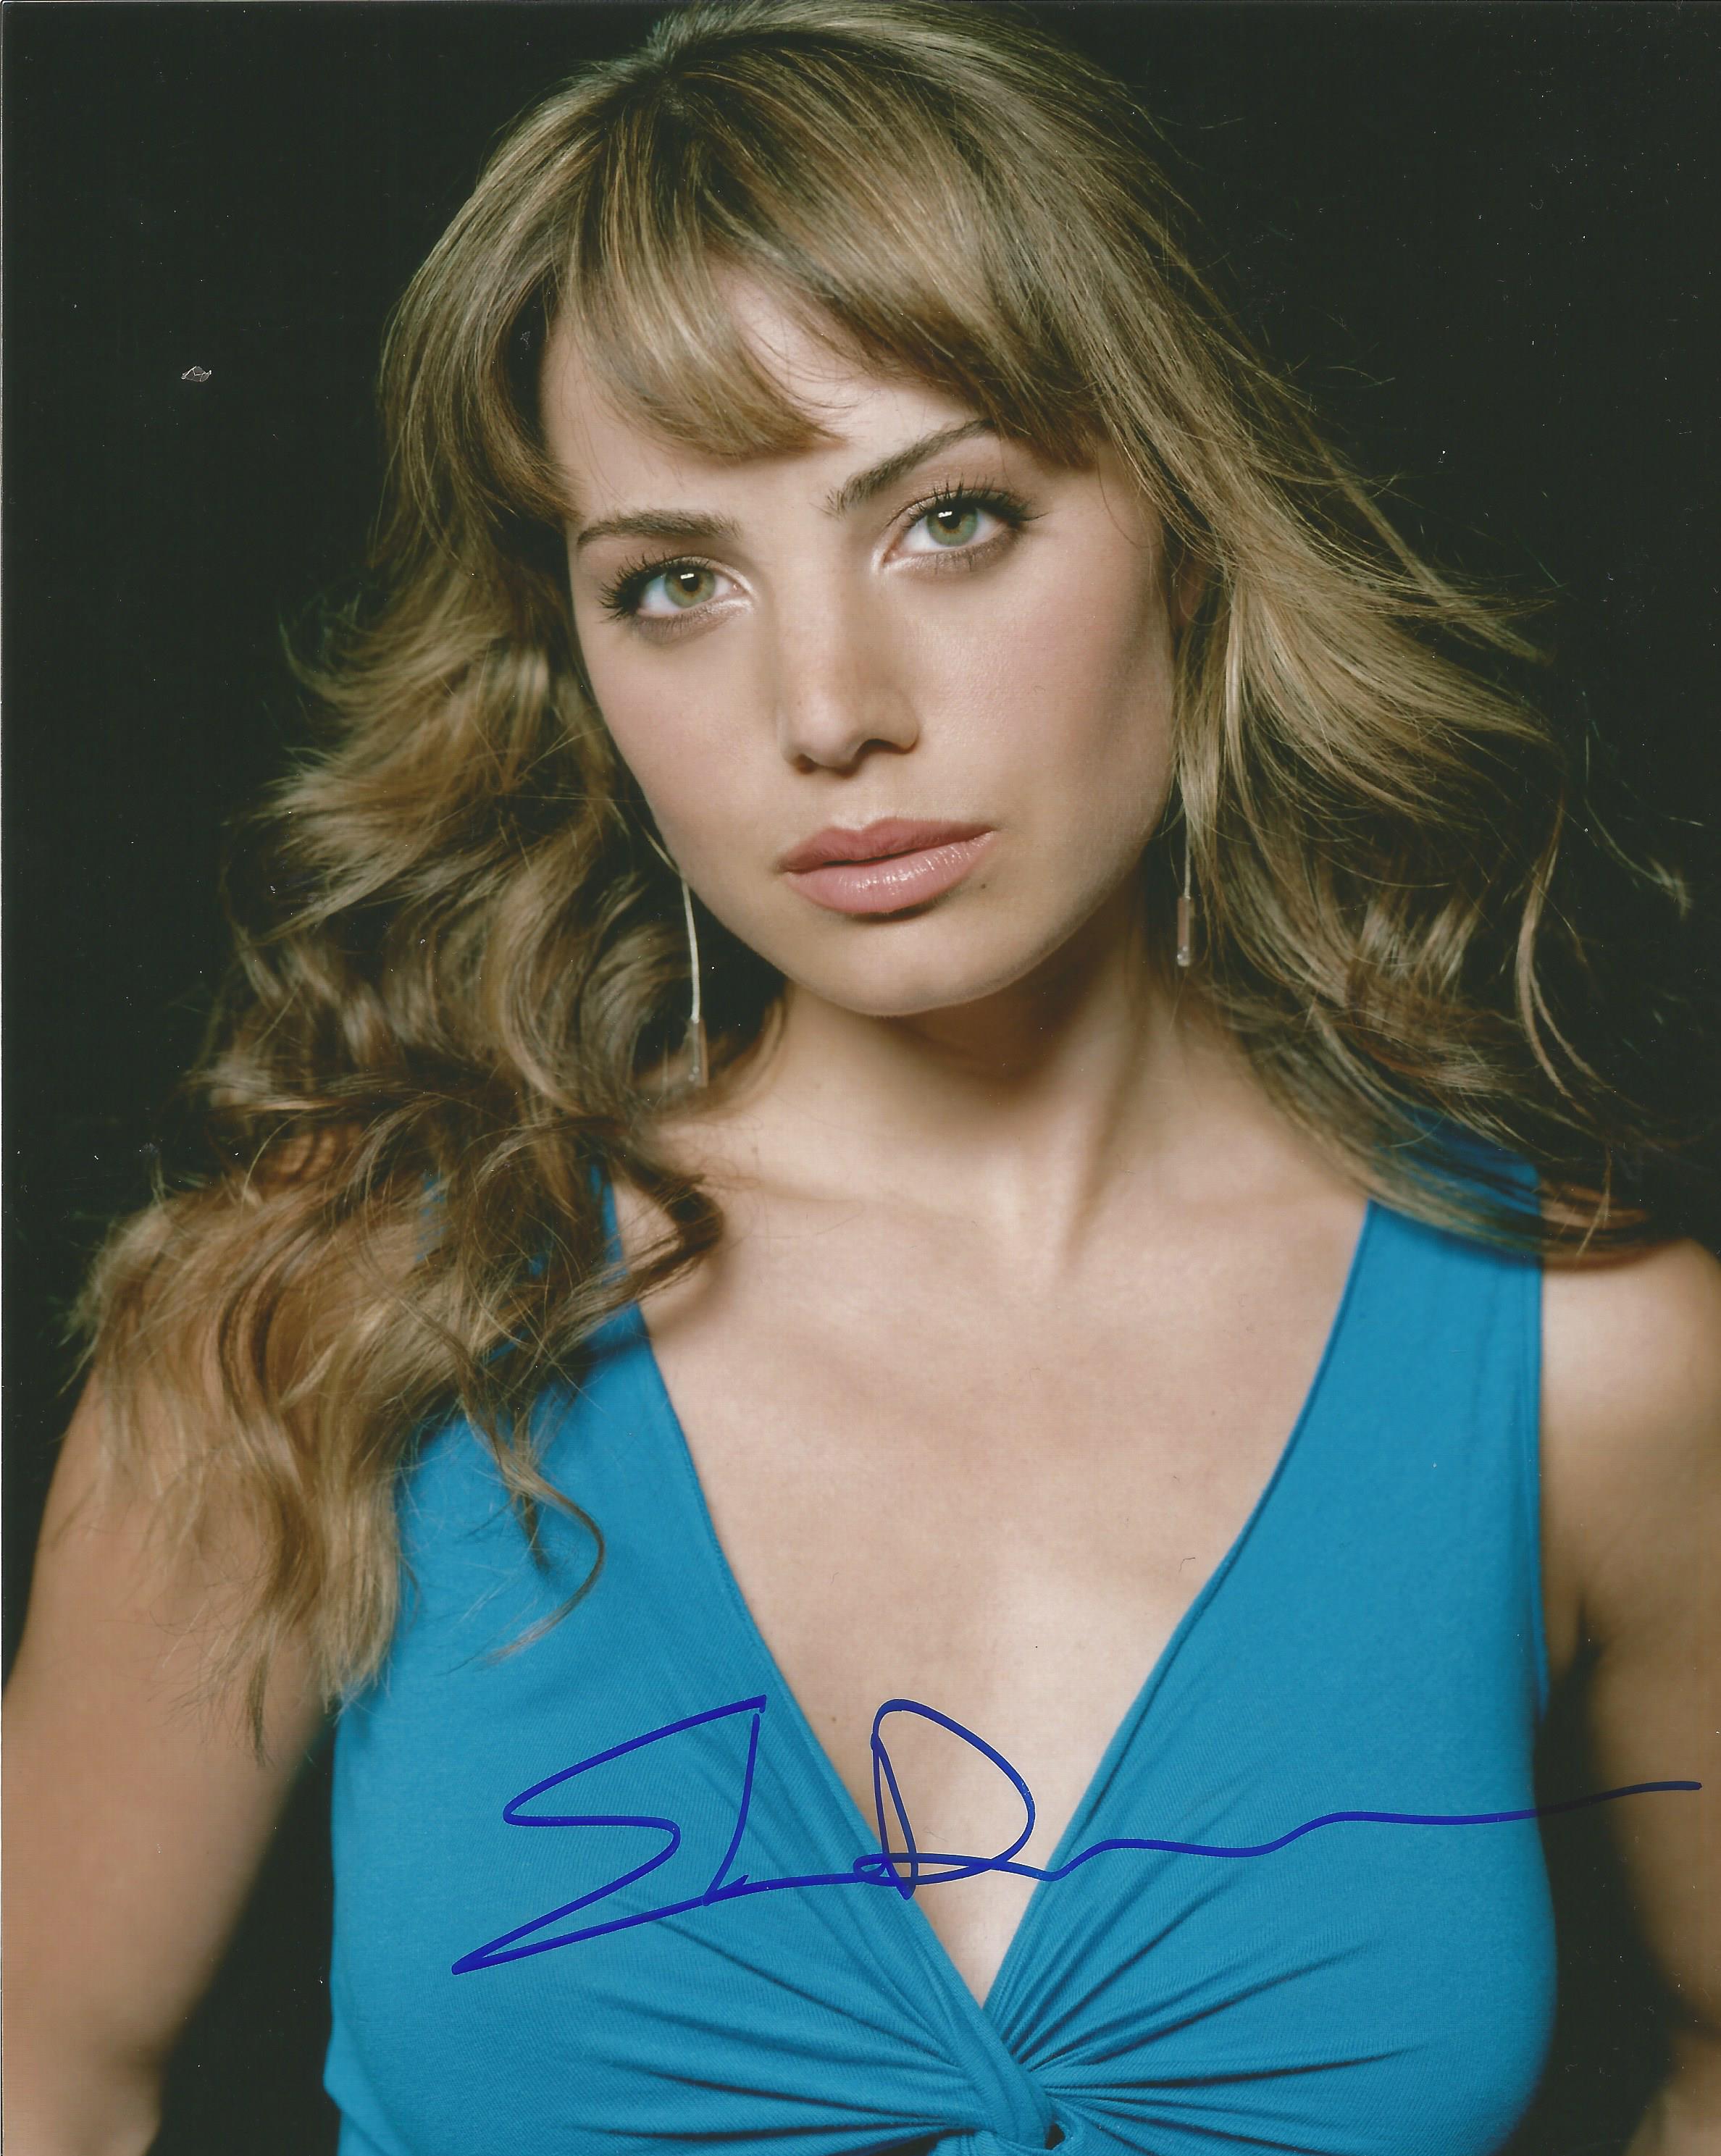 Erica Durance signed 10x8 photograph pictured during her time as Lois Lane in the Superman series,